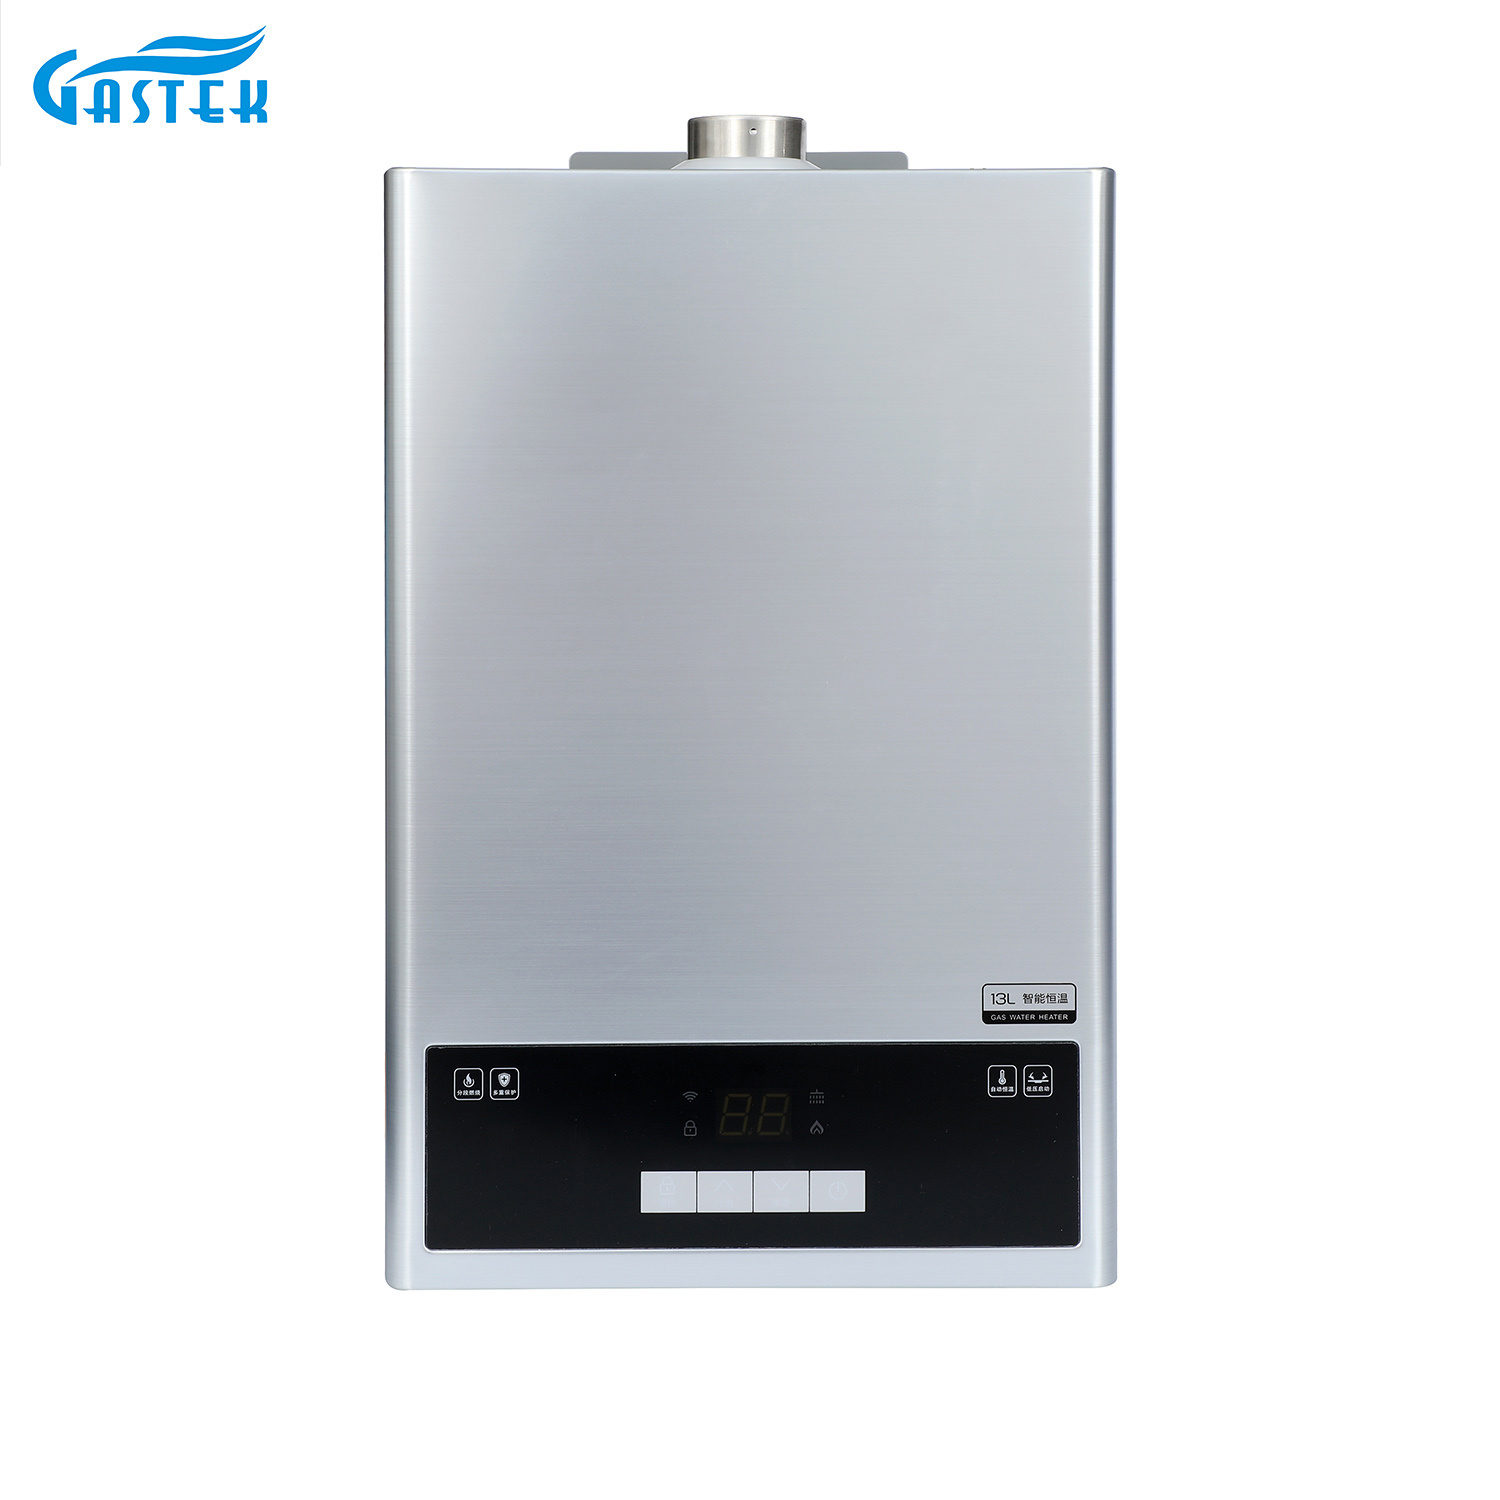 Household Gas Water Heater Constant Temperature Forced Type 12L Compact Size Gas Geyser for Shower